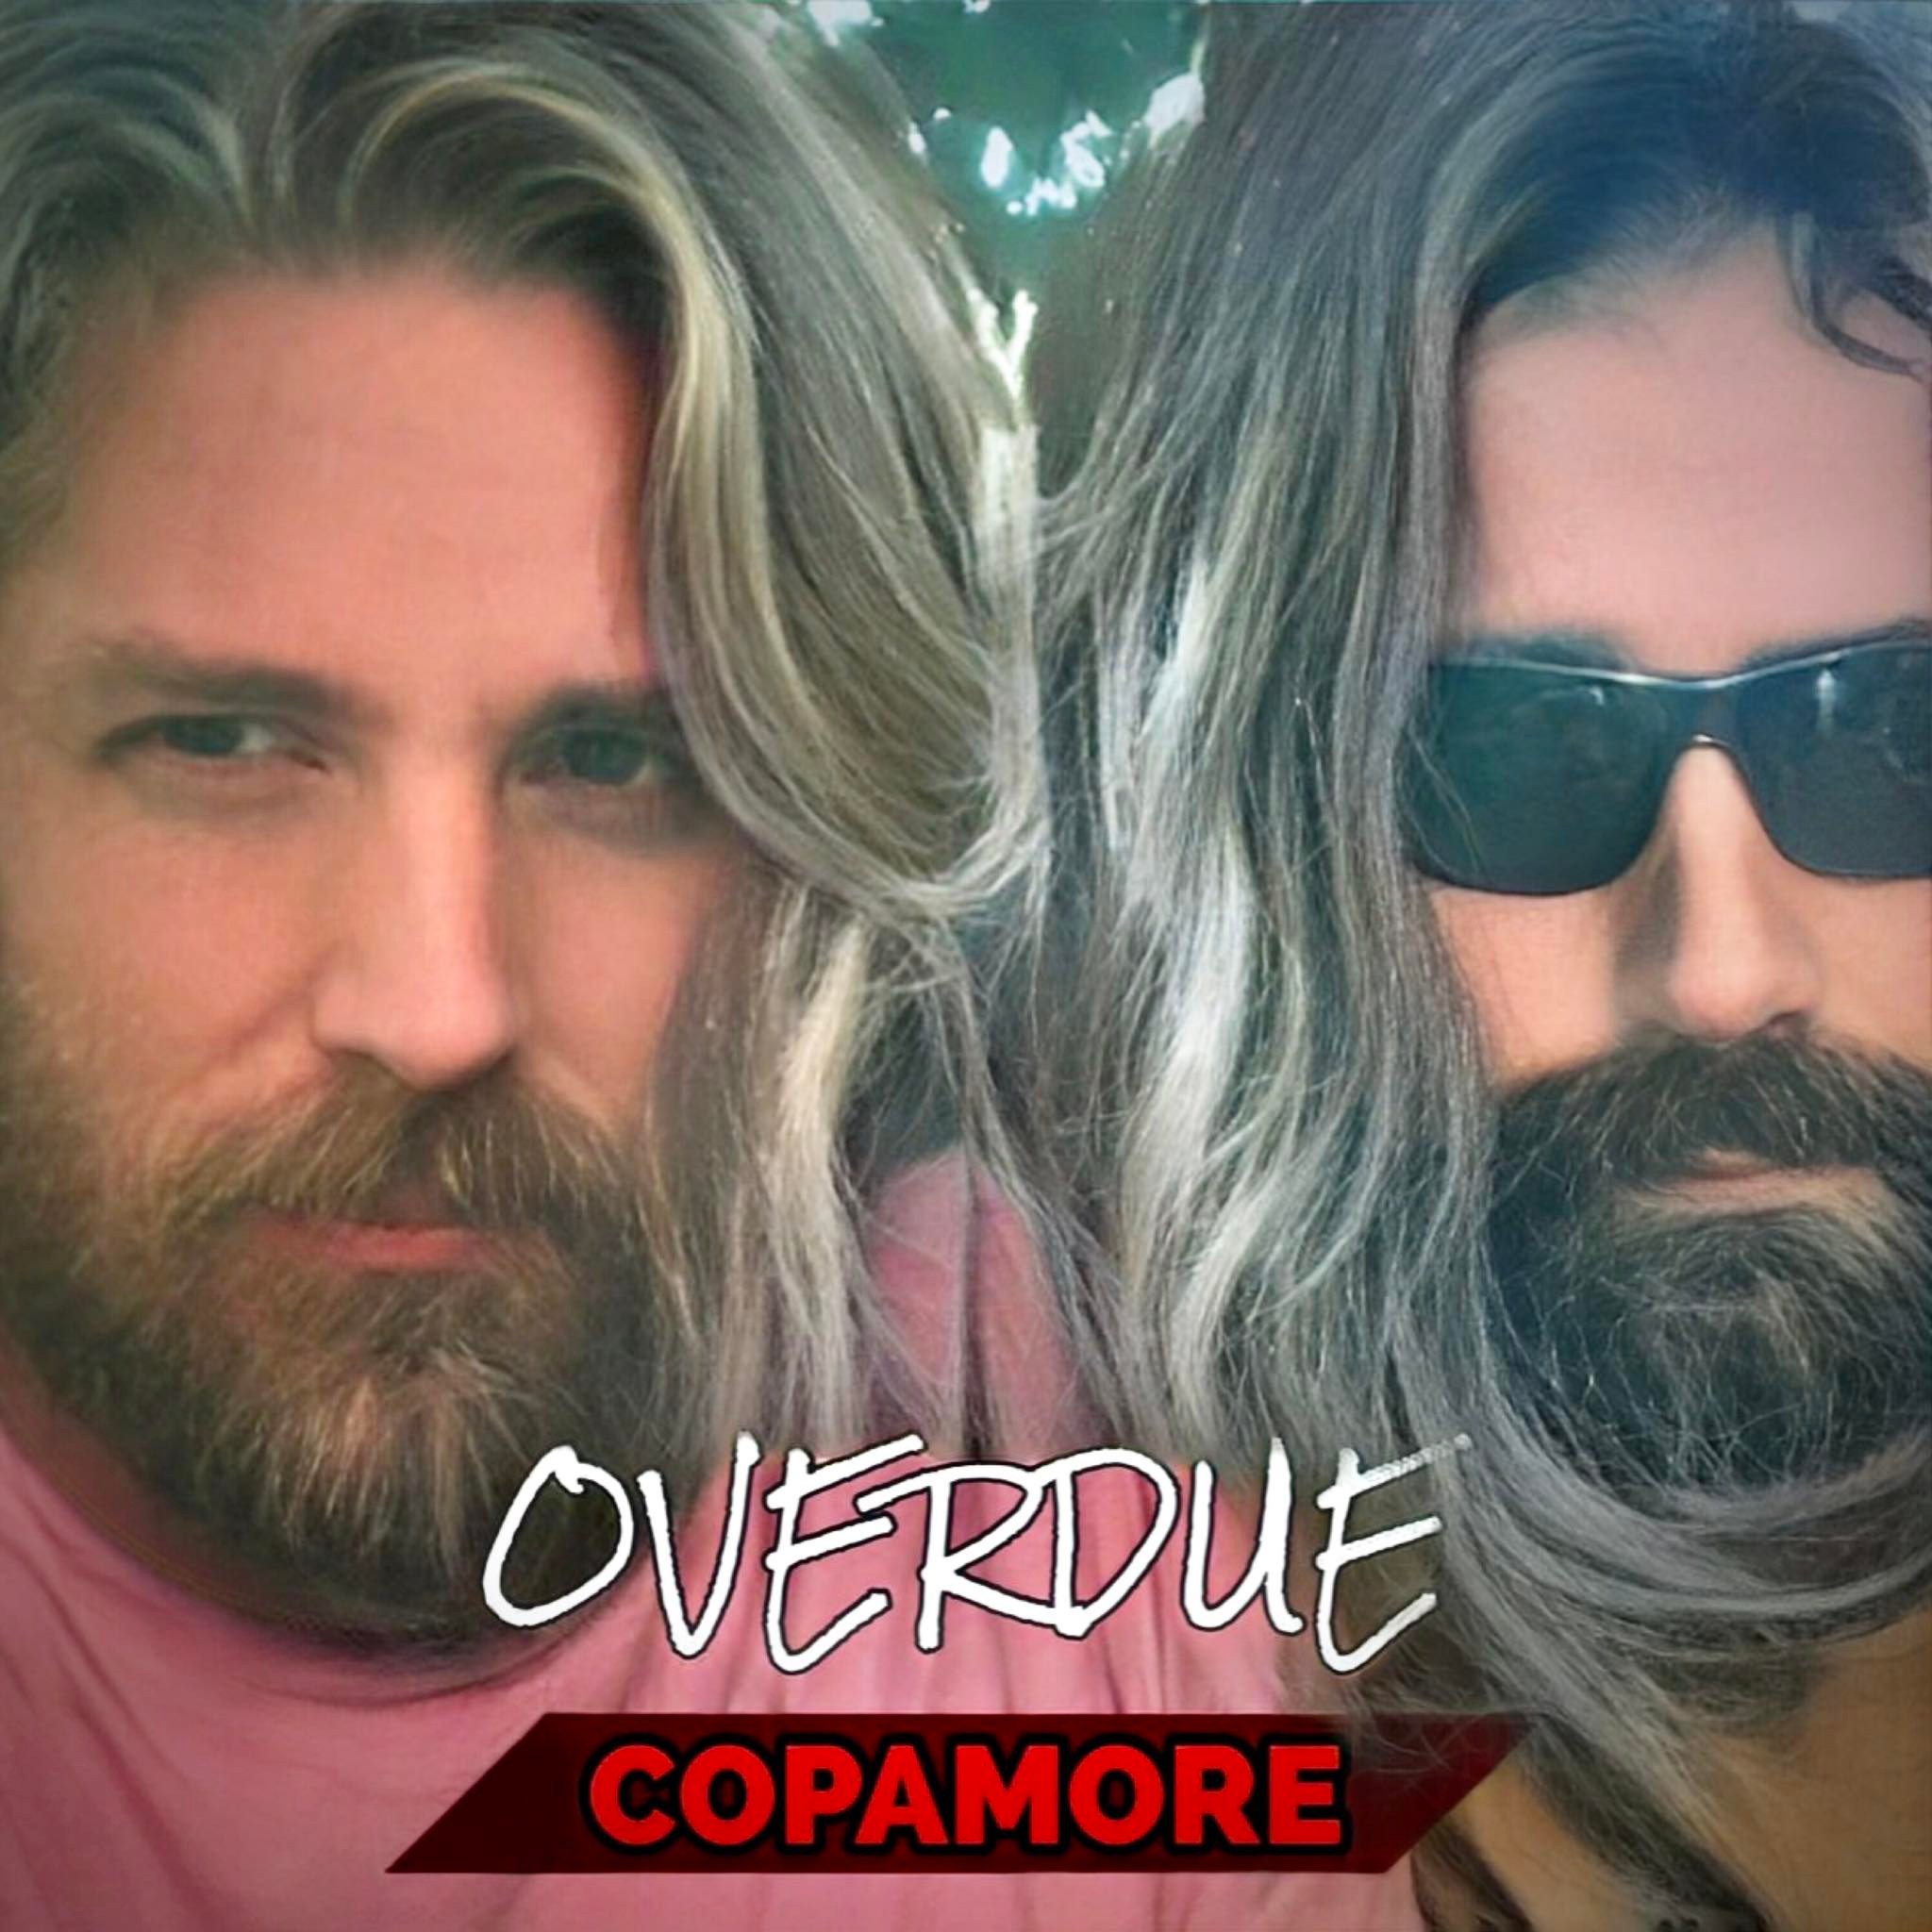 From EDM to 80s-Inspired Rock: Copamore’s Latest Single ‘Overdue’ Takes Fans on a Musical Journey